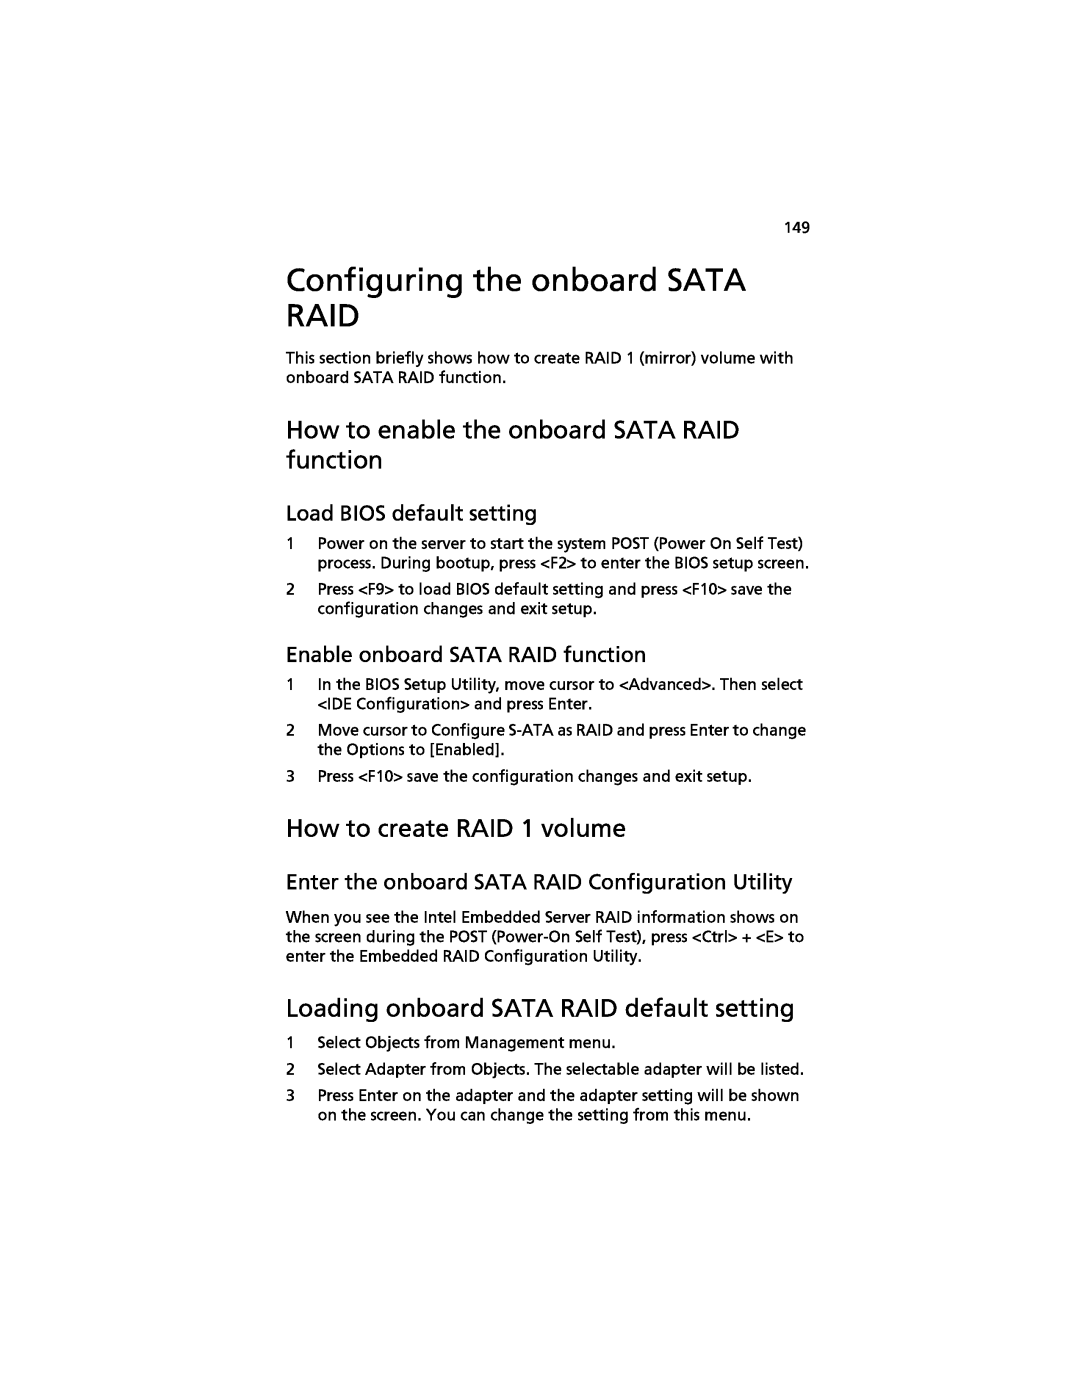 Acer G520 series manual Configuring the onboard SATA RAID, How to enable the onboard SATA RAID function 